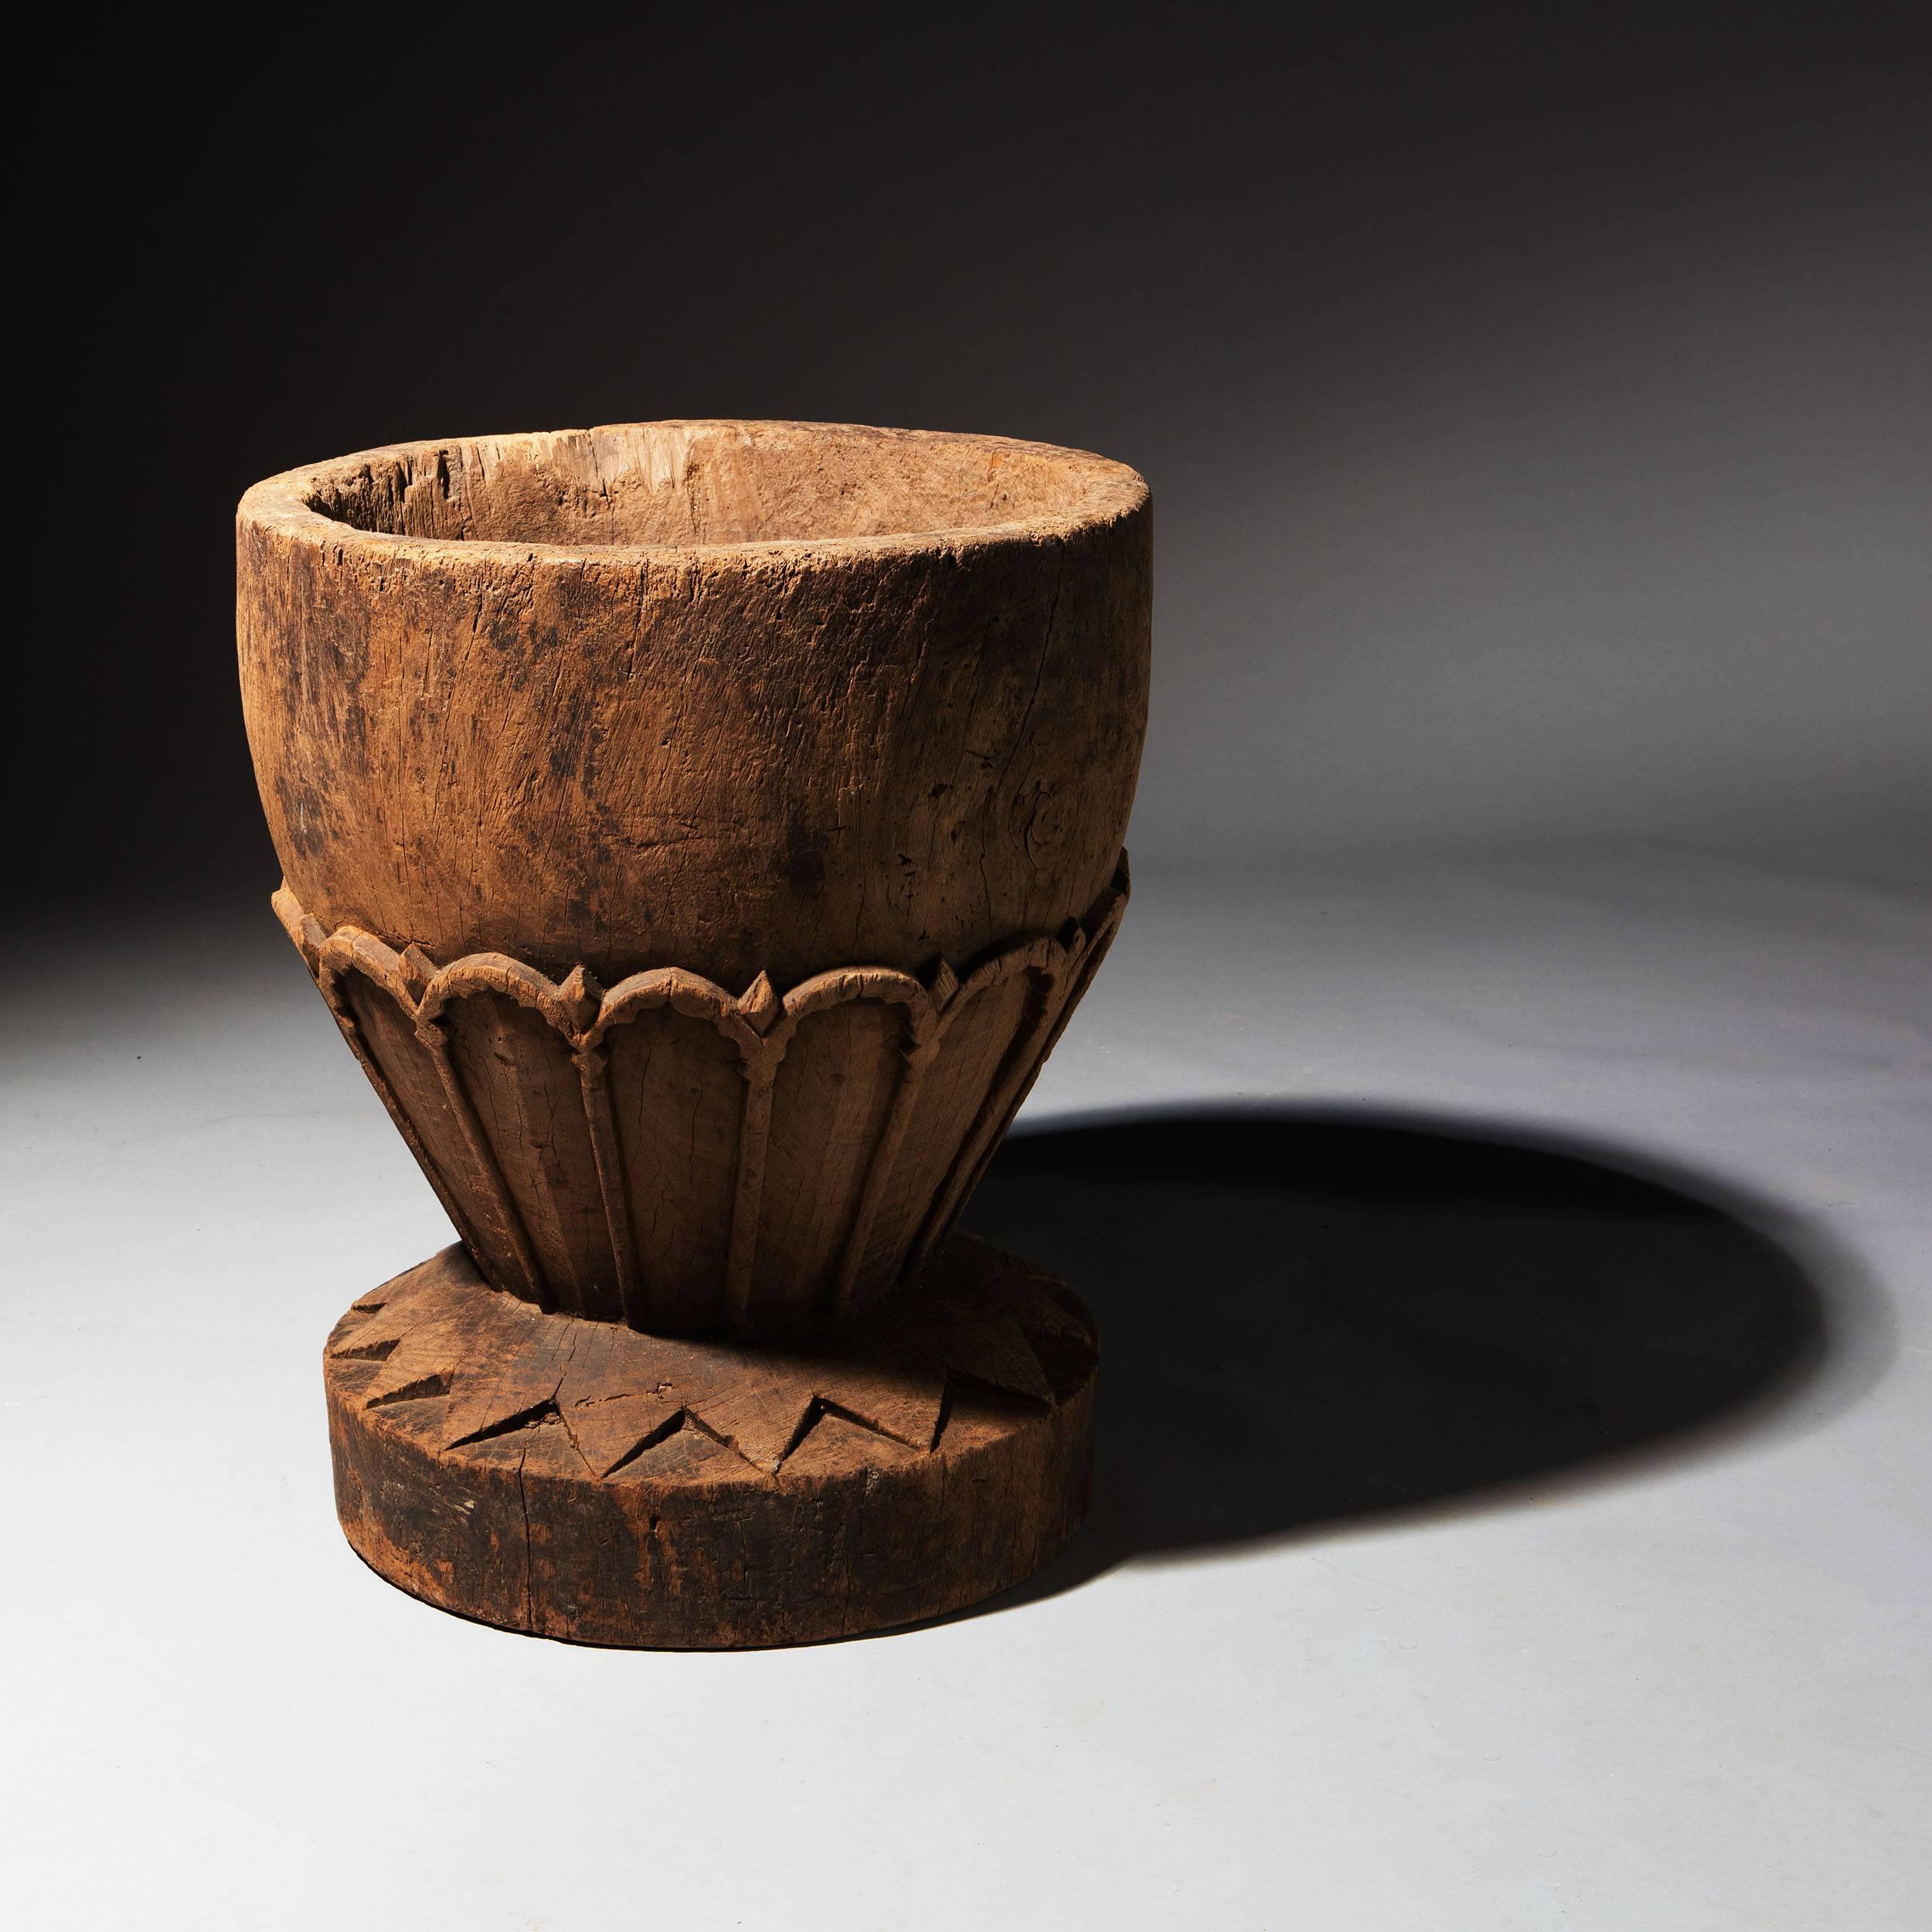 Indian, 19th century

A large-scale wooden mortar with chevron ornament carved in high relief base and petal ornament to the bowl. The fabulous object is rich with character in the wood itself and its overall condition. 

Measures: 18.5in, 47cm